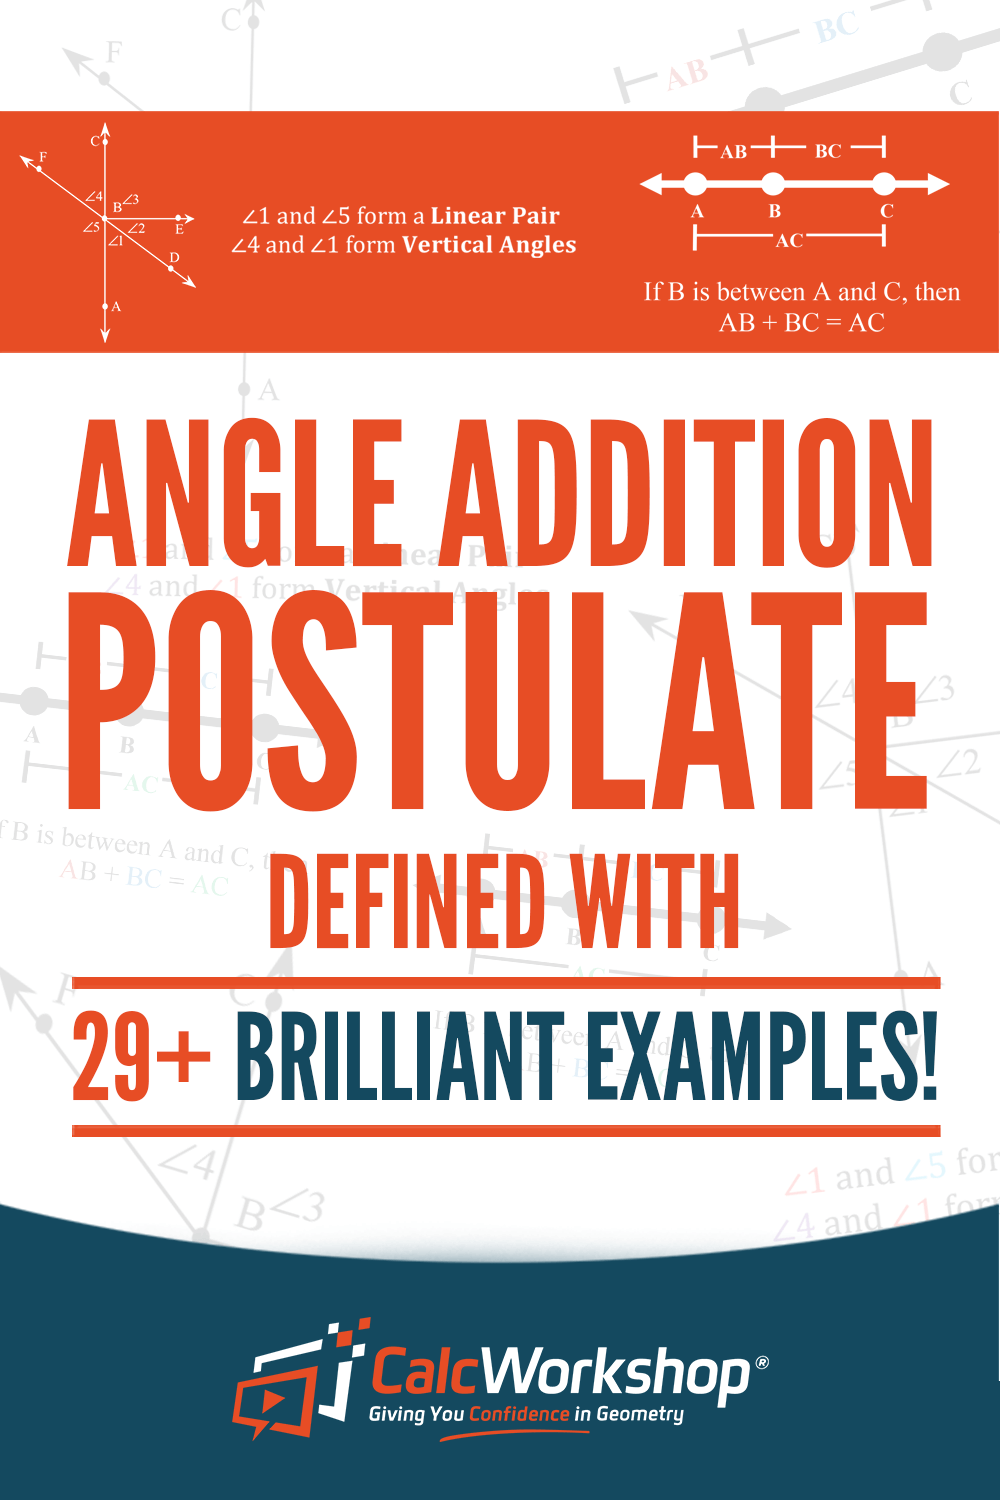 angle-addition-postulate-defined-w-29-examples